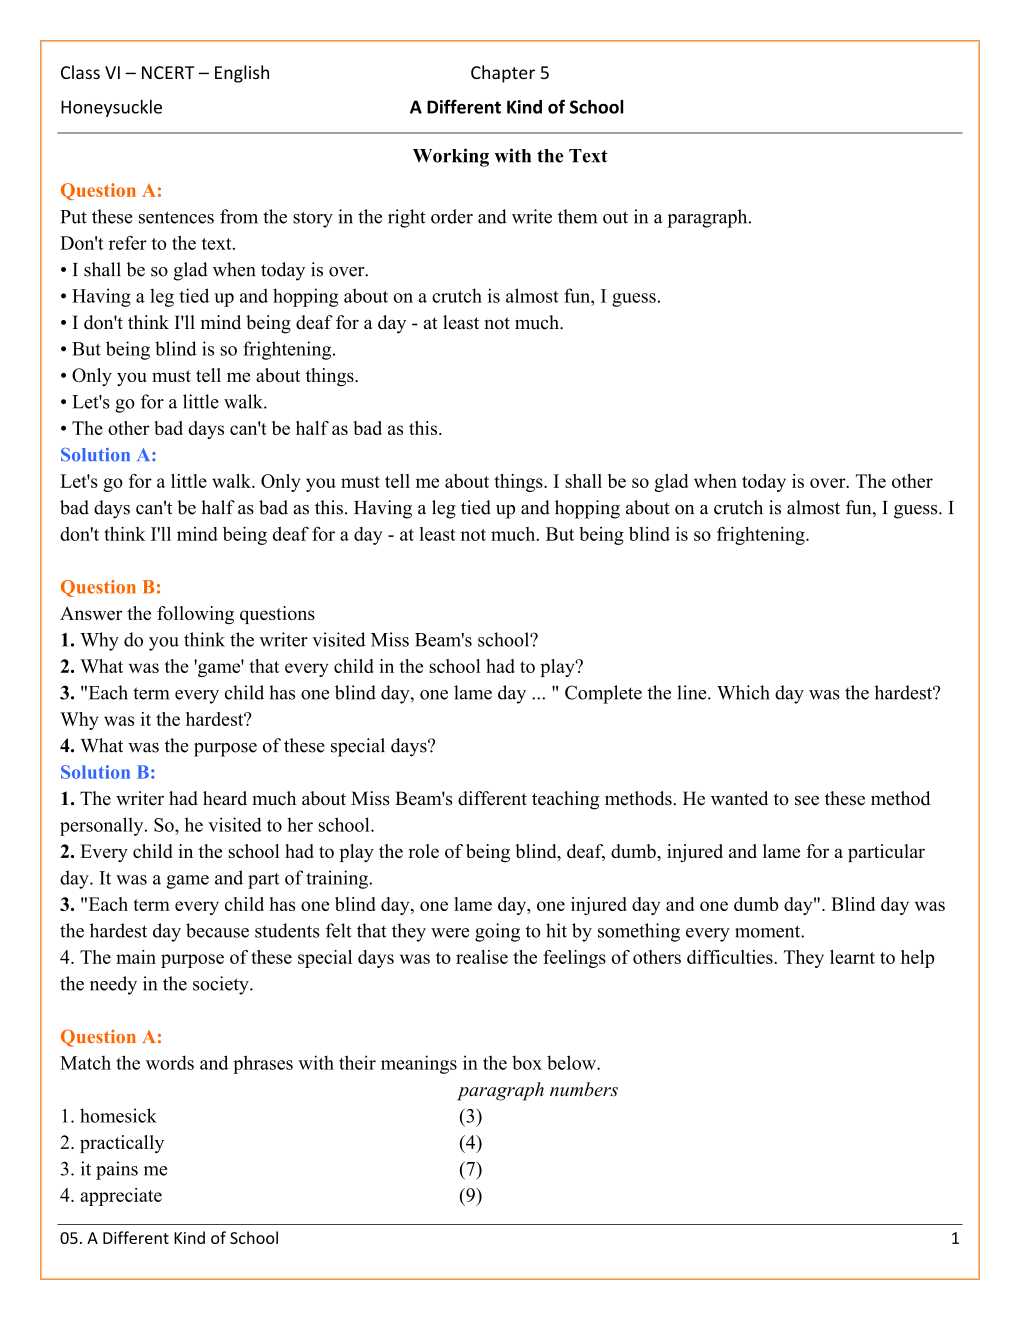 NCERT Solutions For Class 6 English Honeysuckle Chapter 5